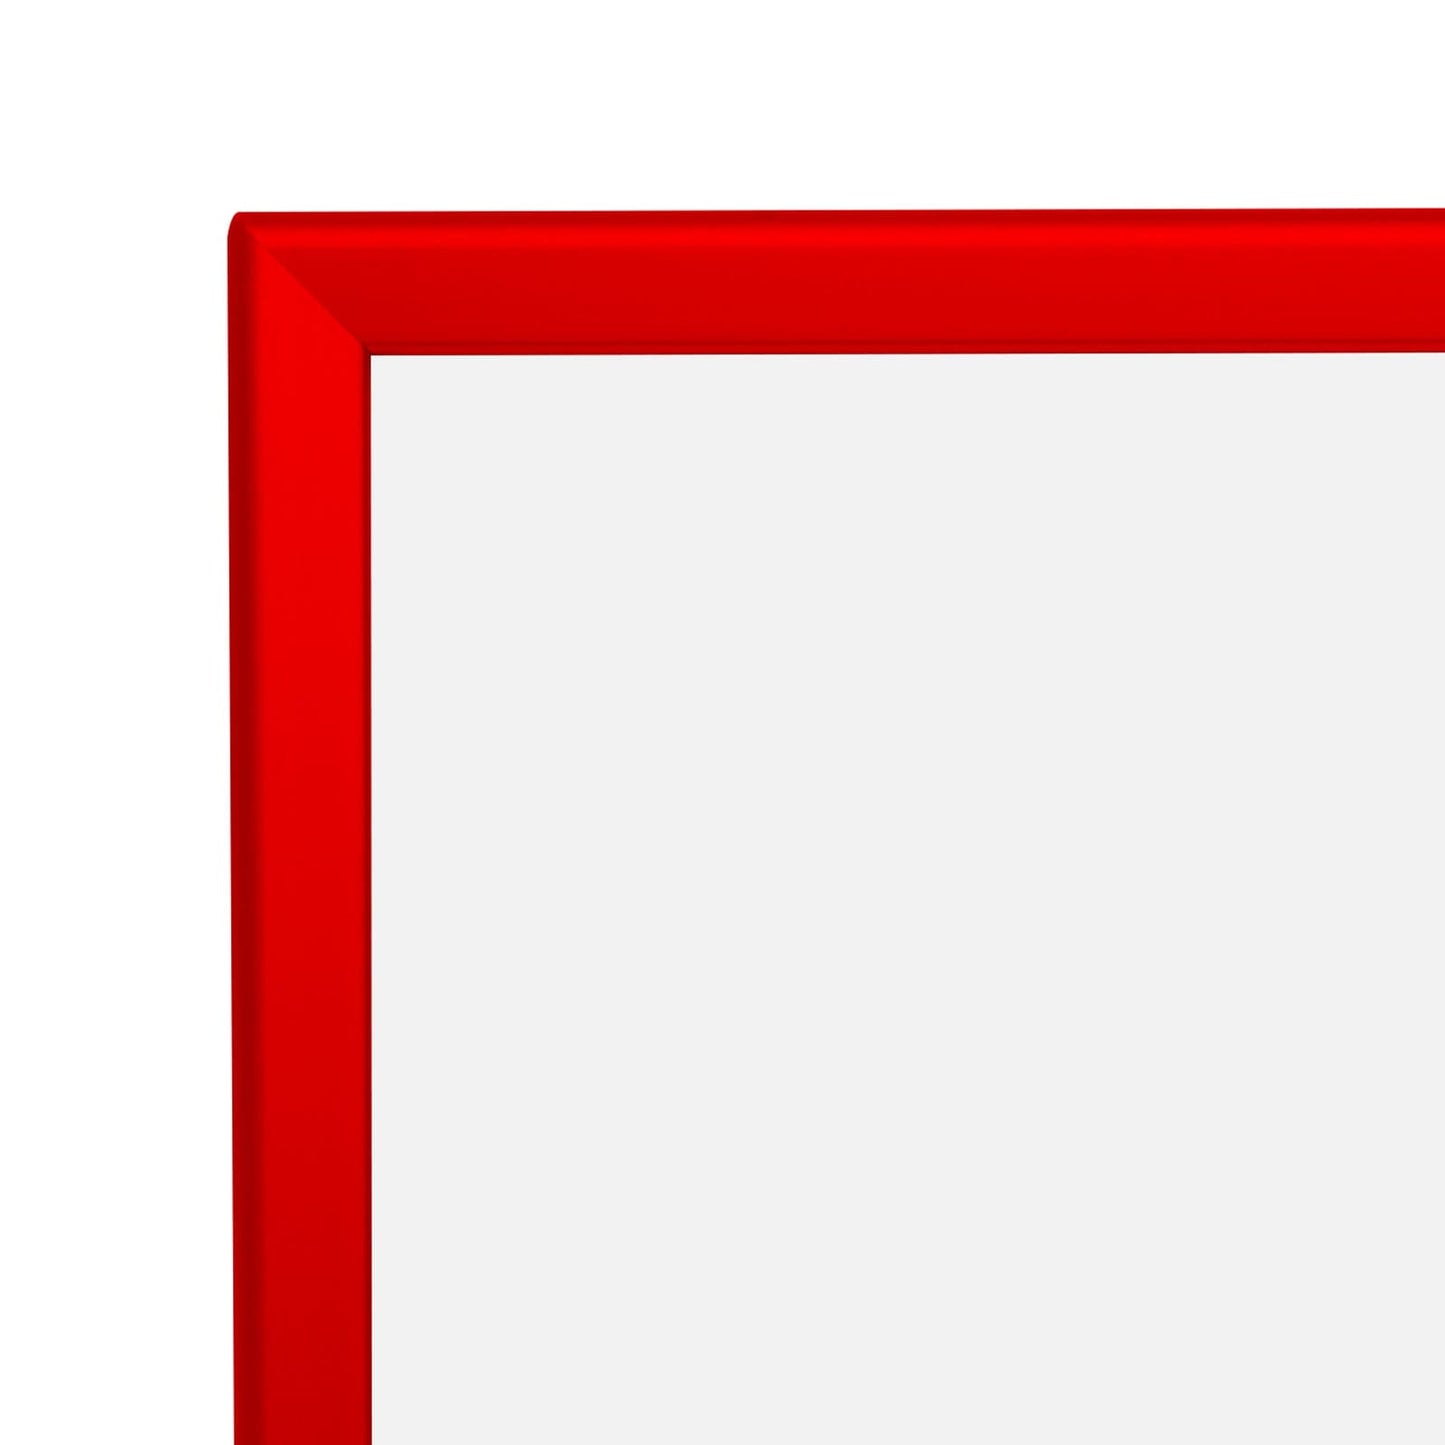 16x20  TRADEframe Red Snap Frame 16x20 - 1.25 inch profile - Snap Frames Direct